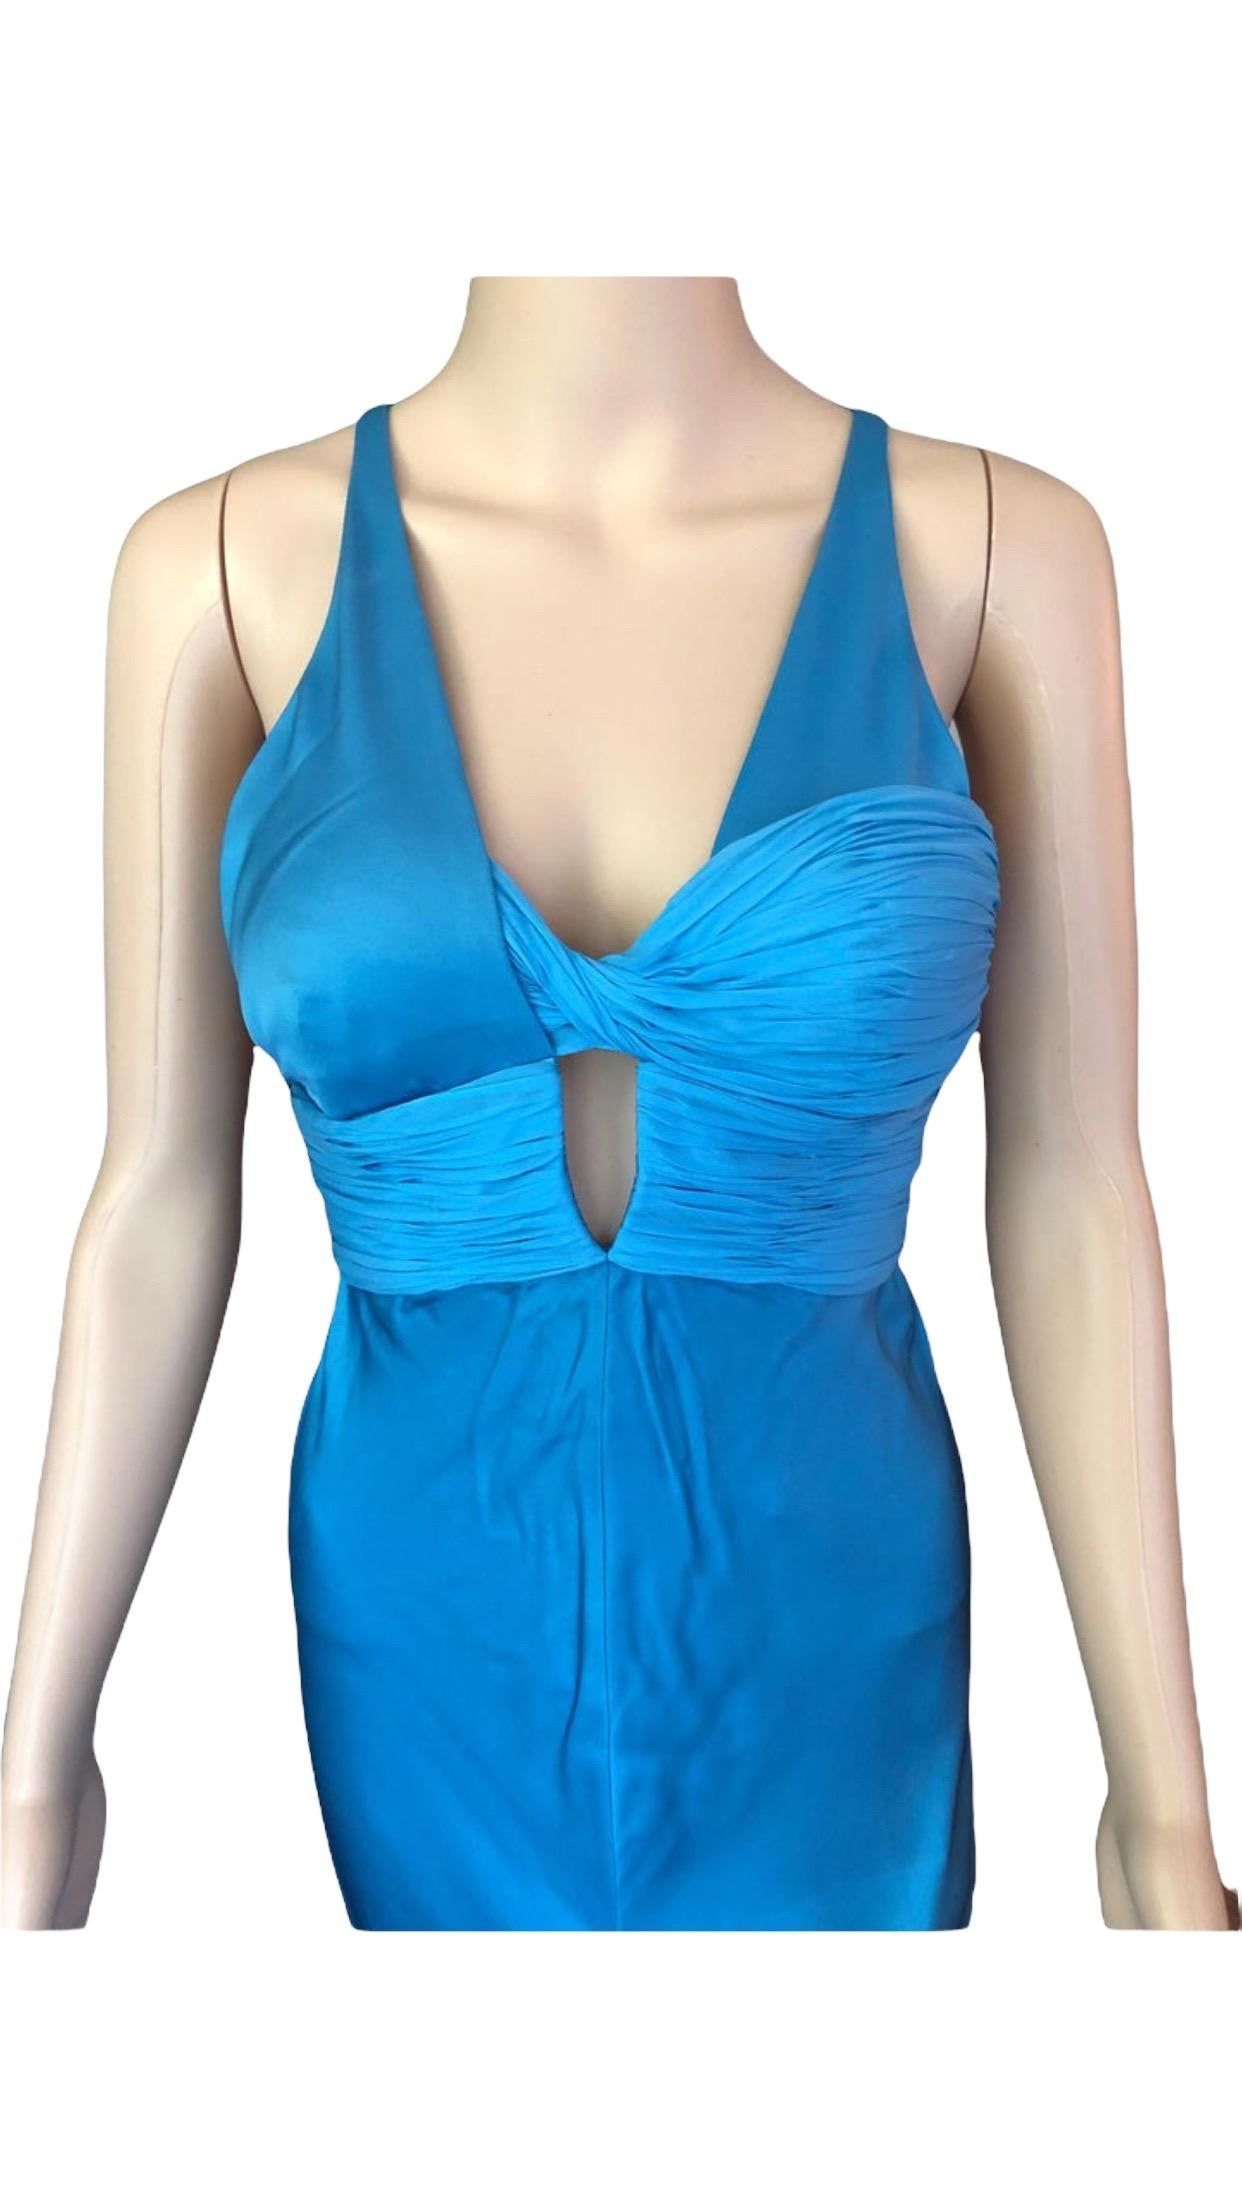 Versace S/S 2004 Bustier Open Back High Slit Blue Dress Gown For Sale 2